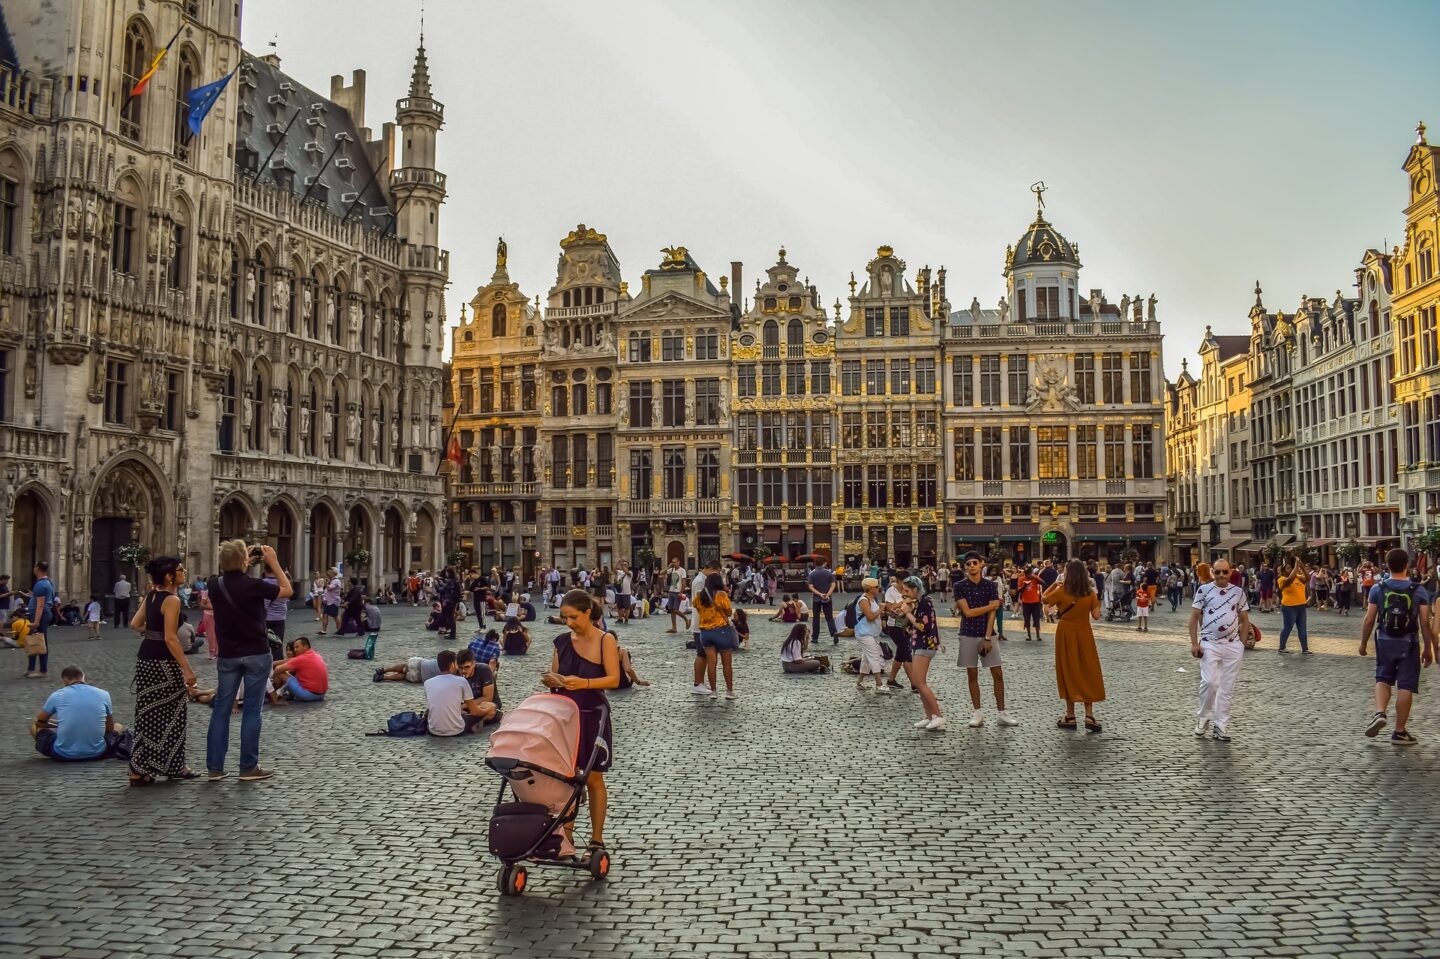 Brussels Grand Place
Perfect 2 day Brussels itinerary